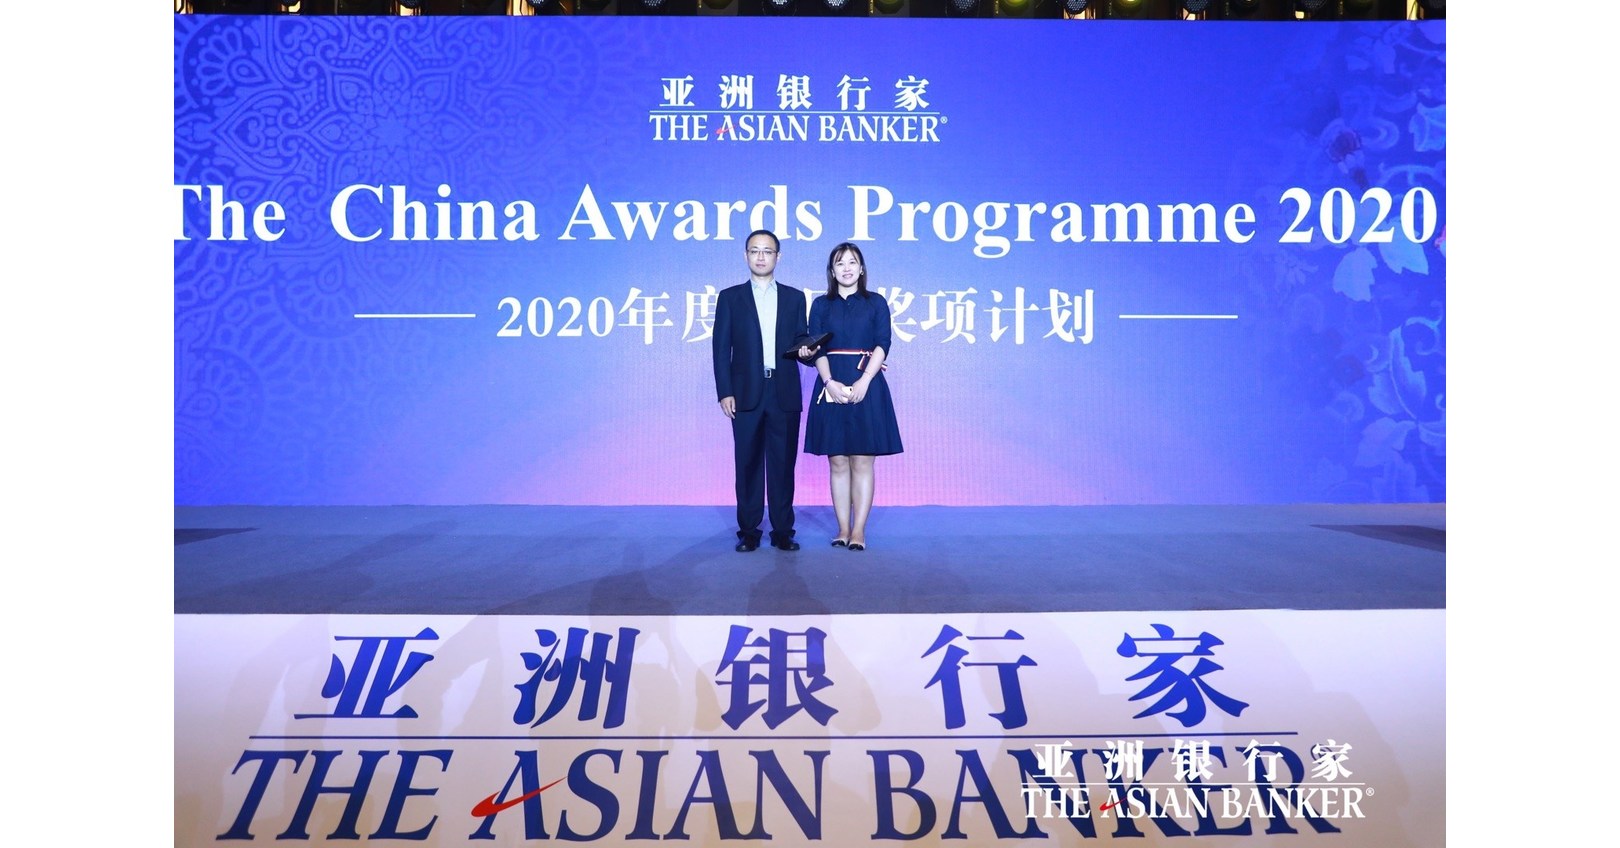 Pintec wins ‘Best Consumer Finance Product in China’ award from The Asian Banker